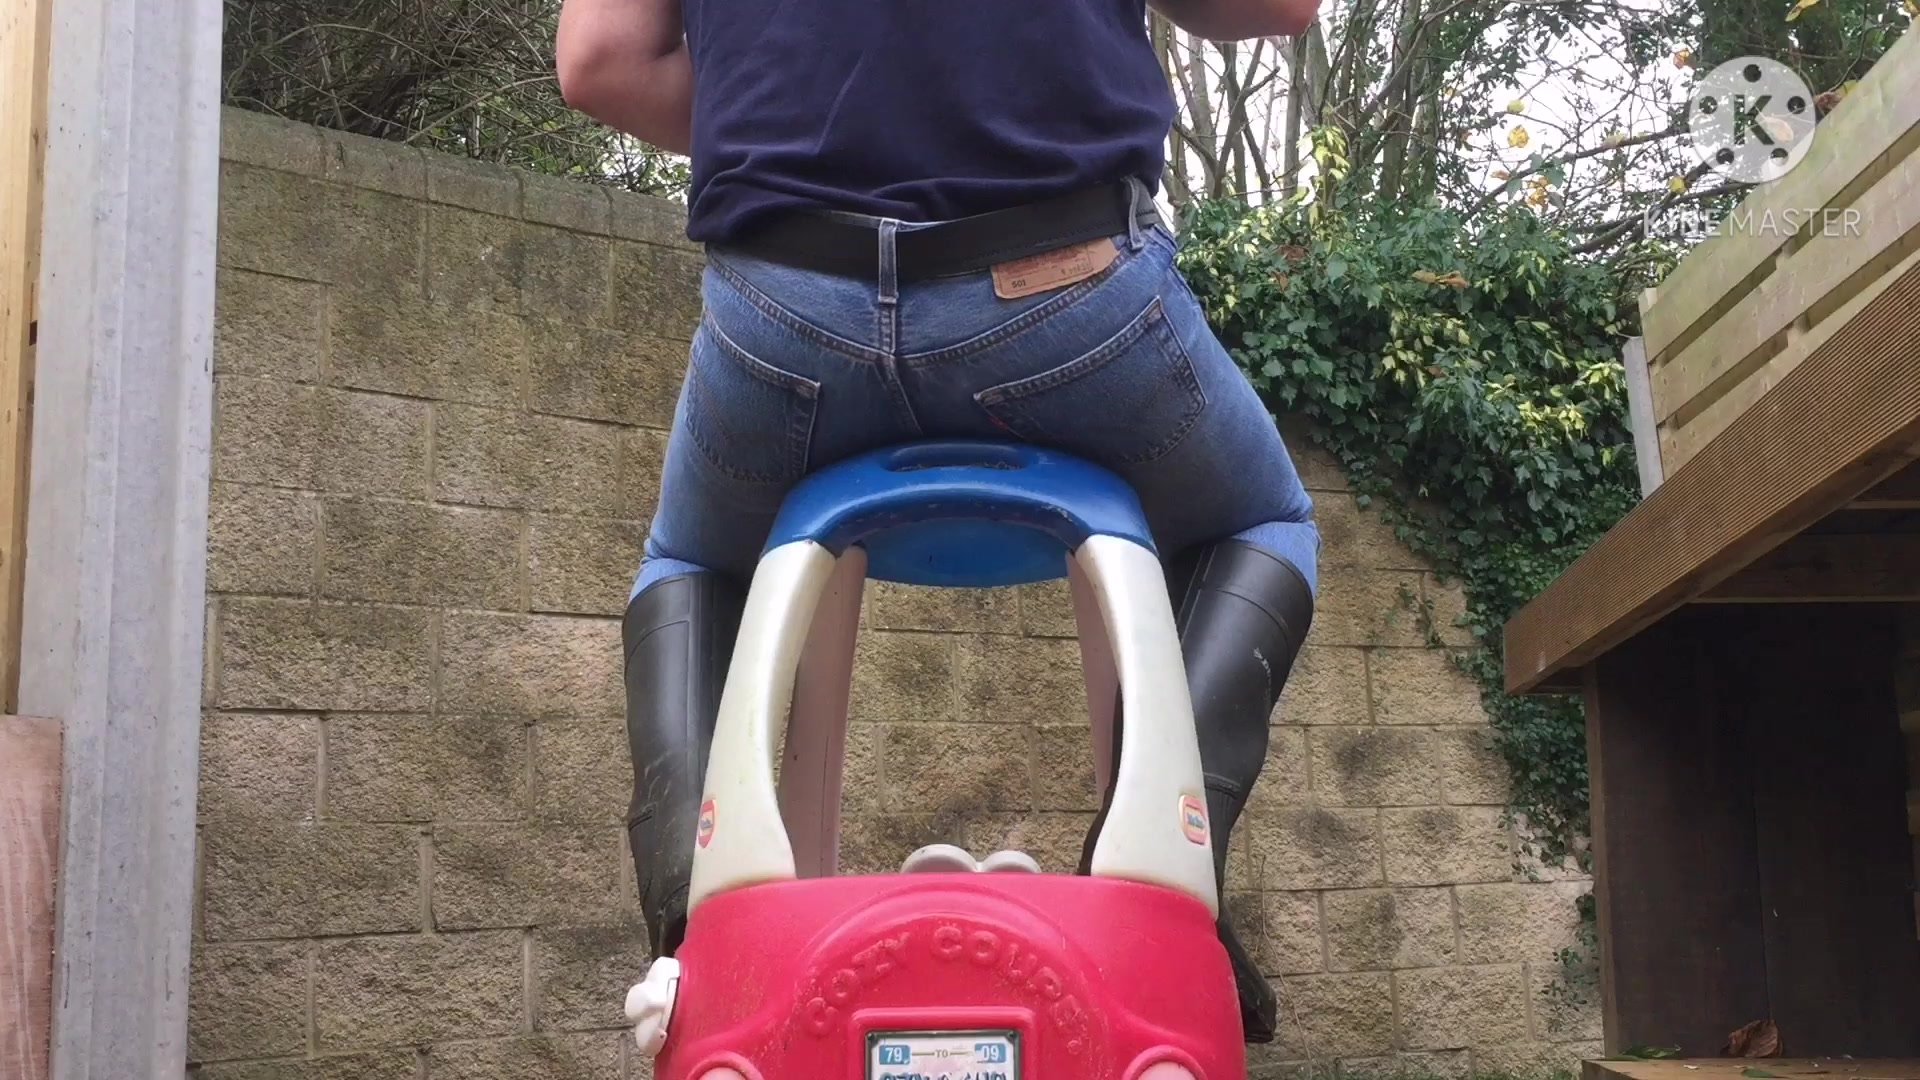 Bouncing on toy car tight levis ass - video 4